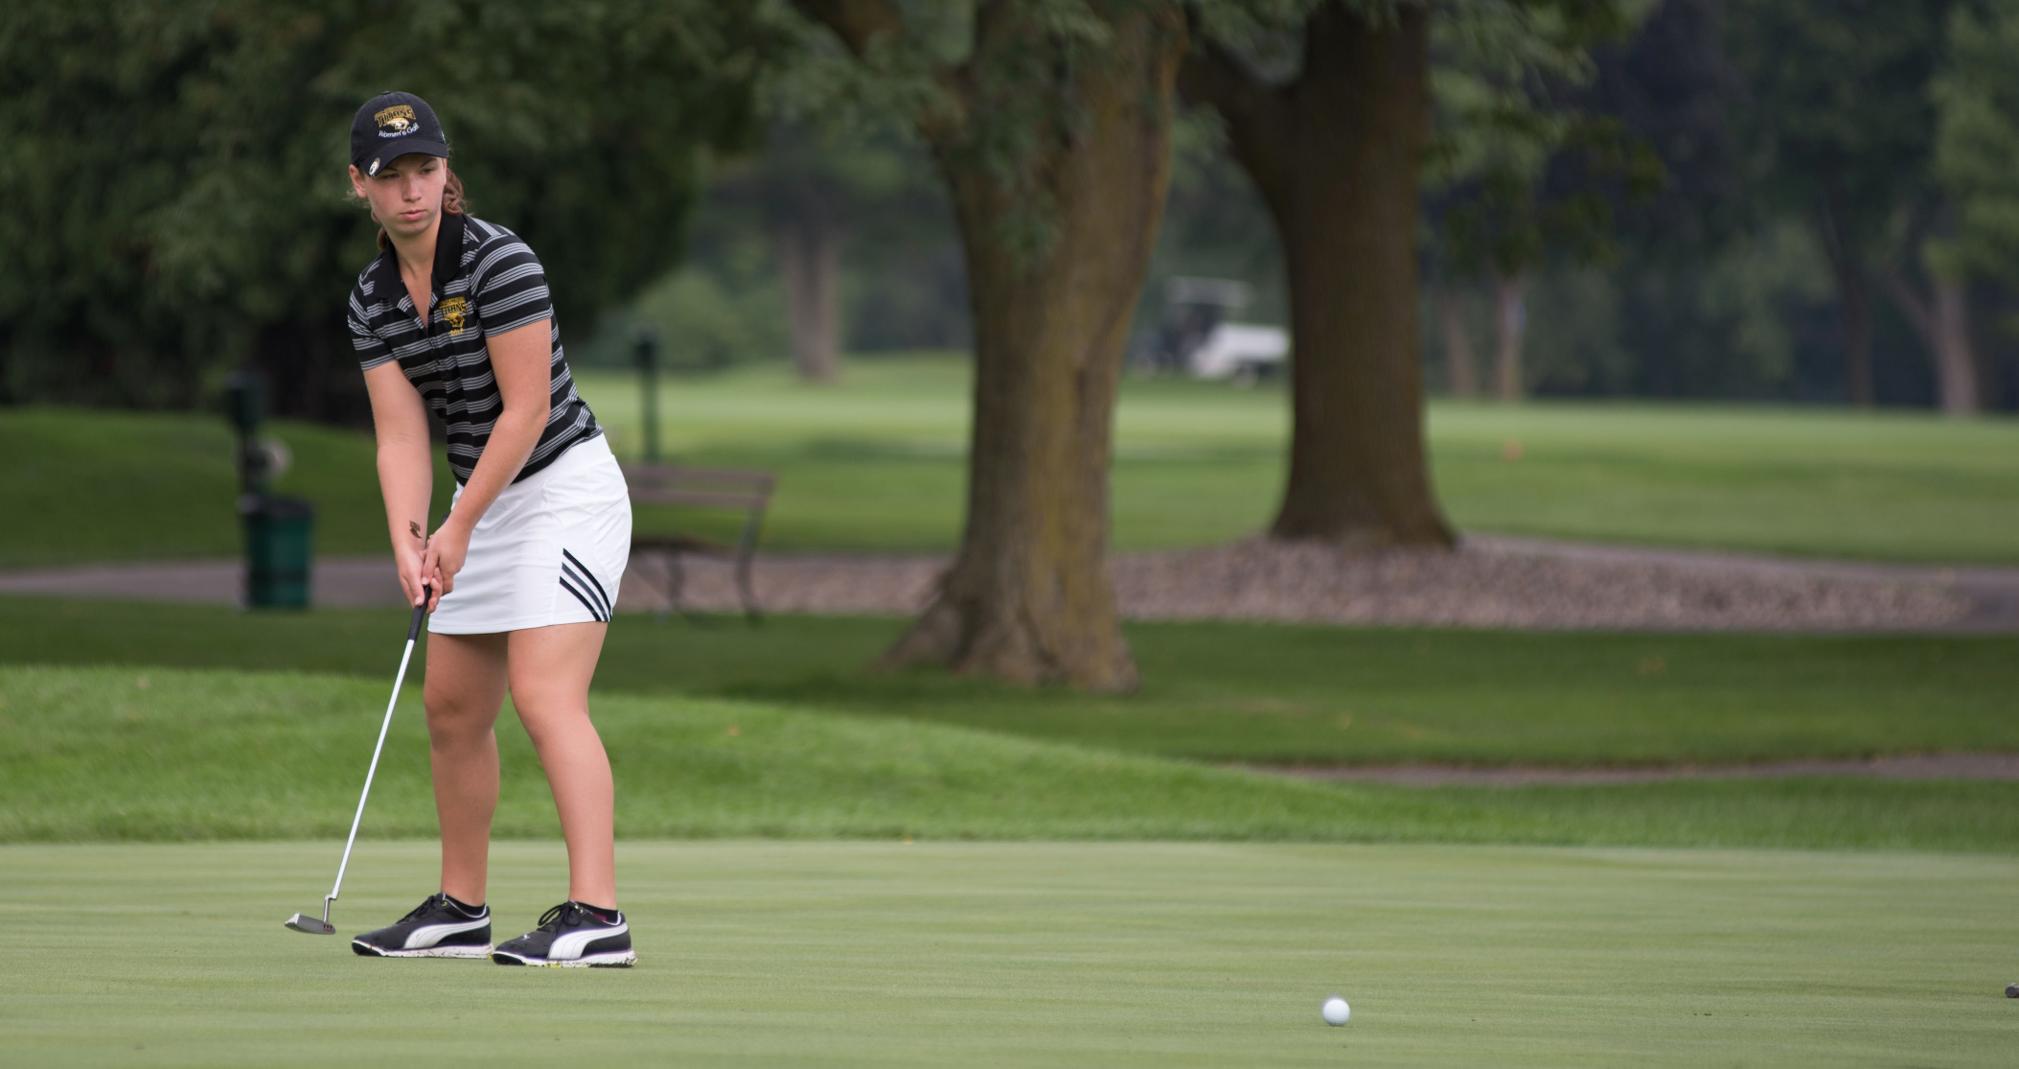 Kayla Priebe finished 14th with 158 strokes, including 78 on the final day of competition.